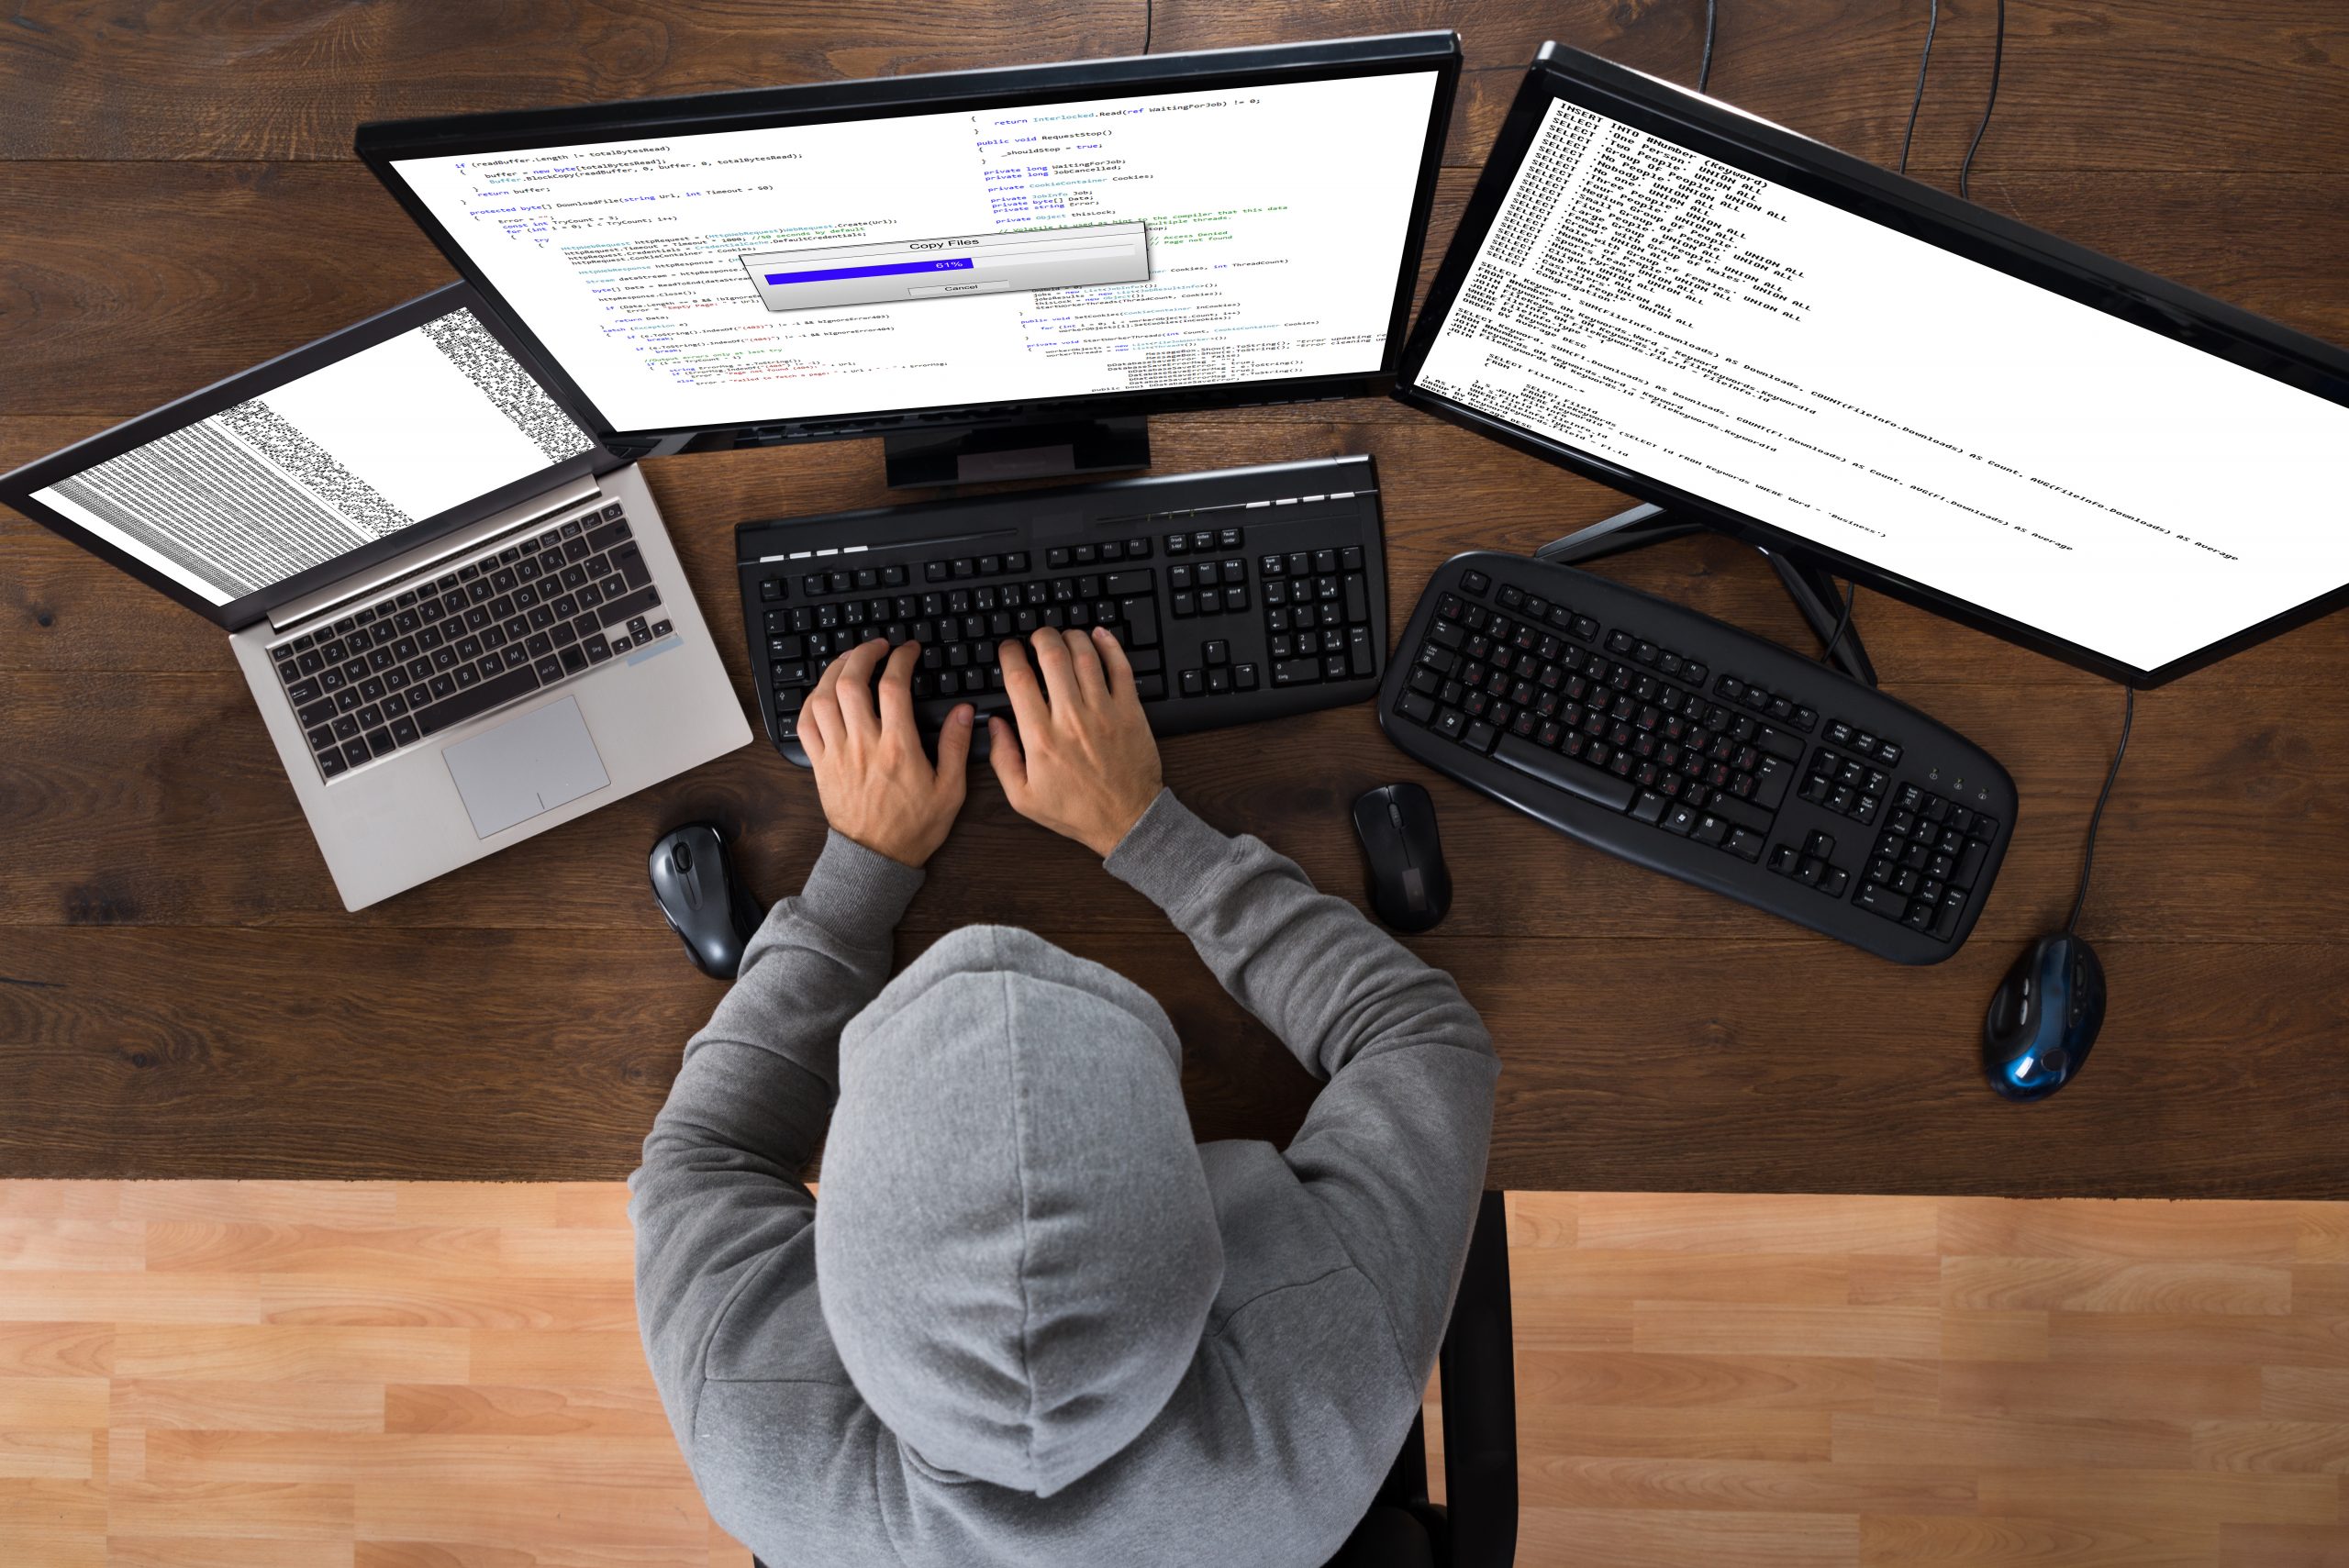 A hooded man at three computers hacking into databases